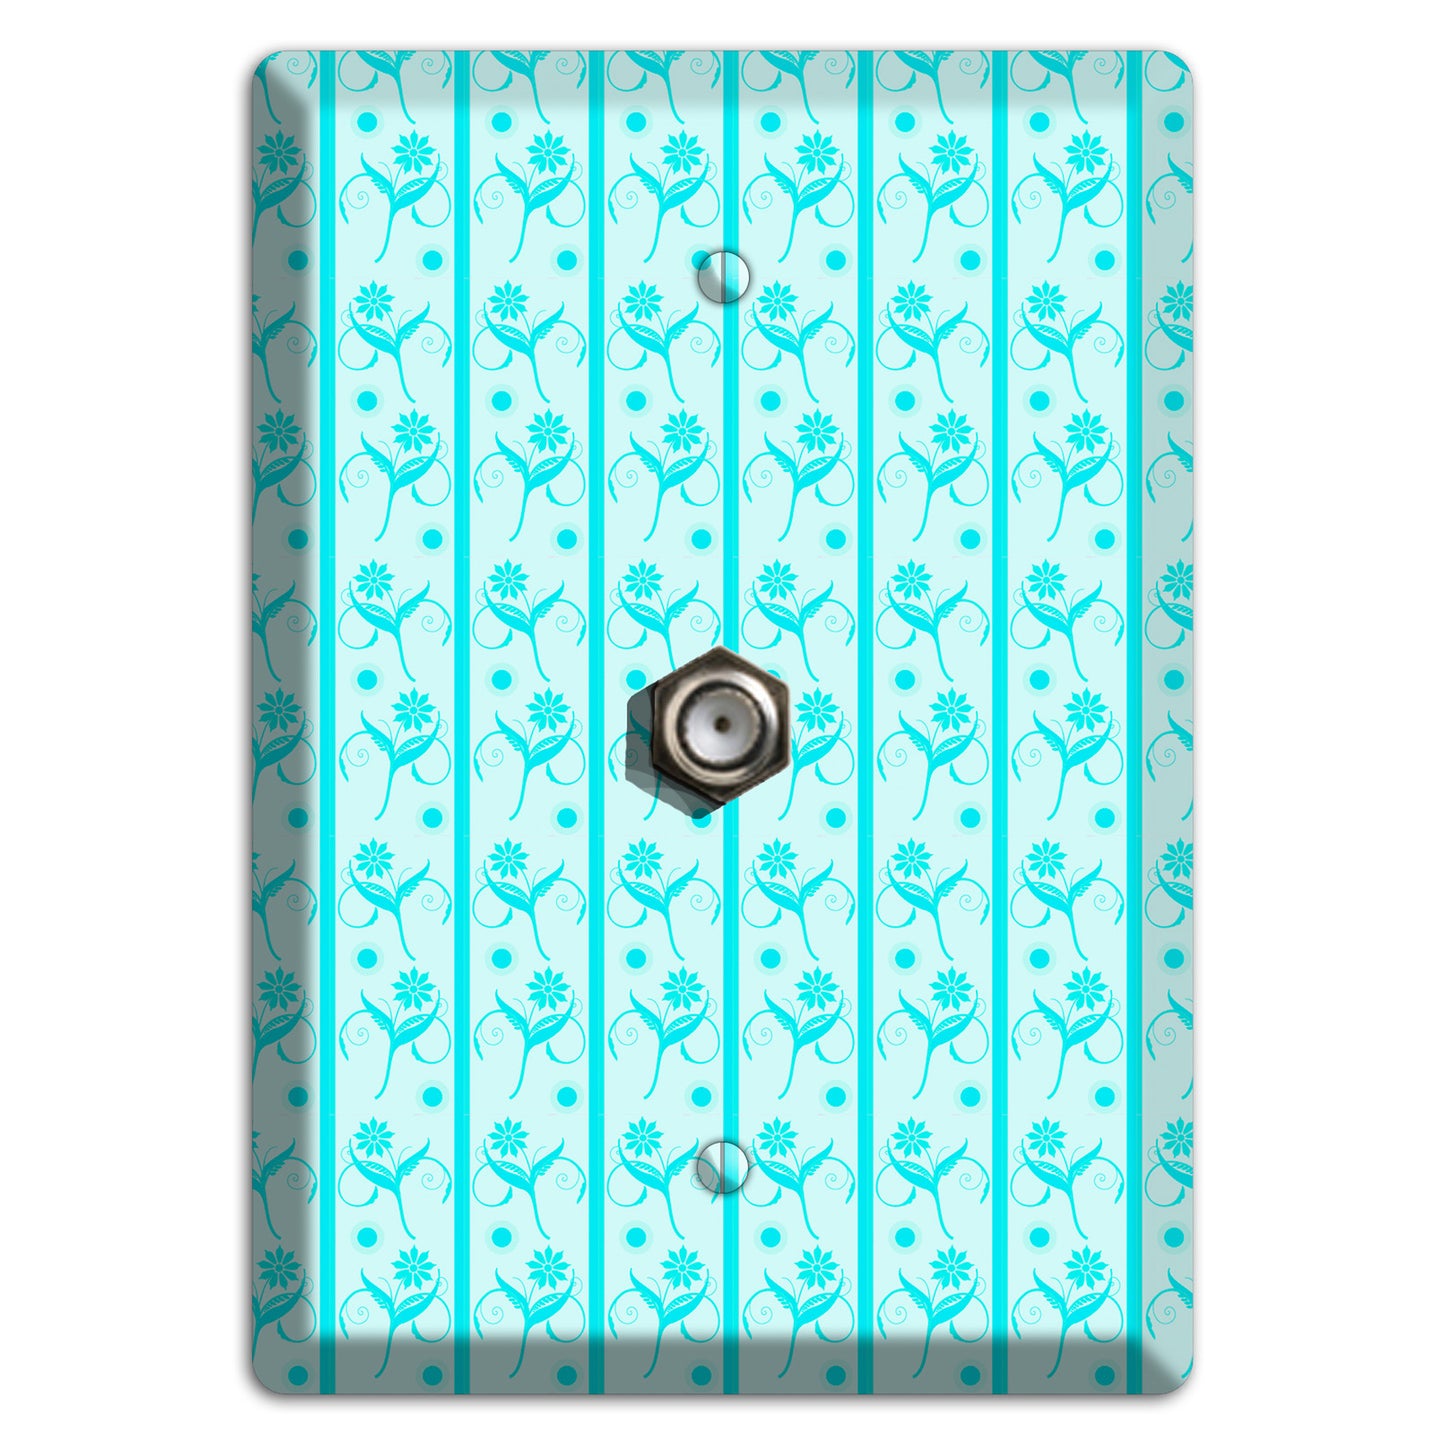 Teal Floral Pattern Cable Wallplate